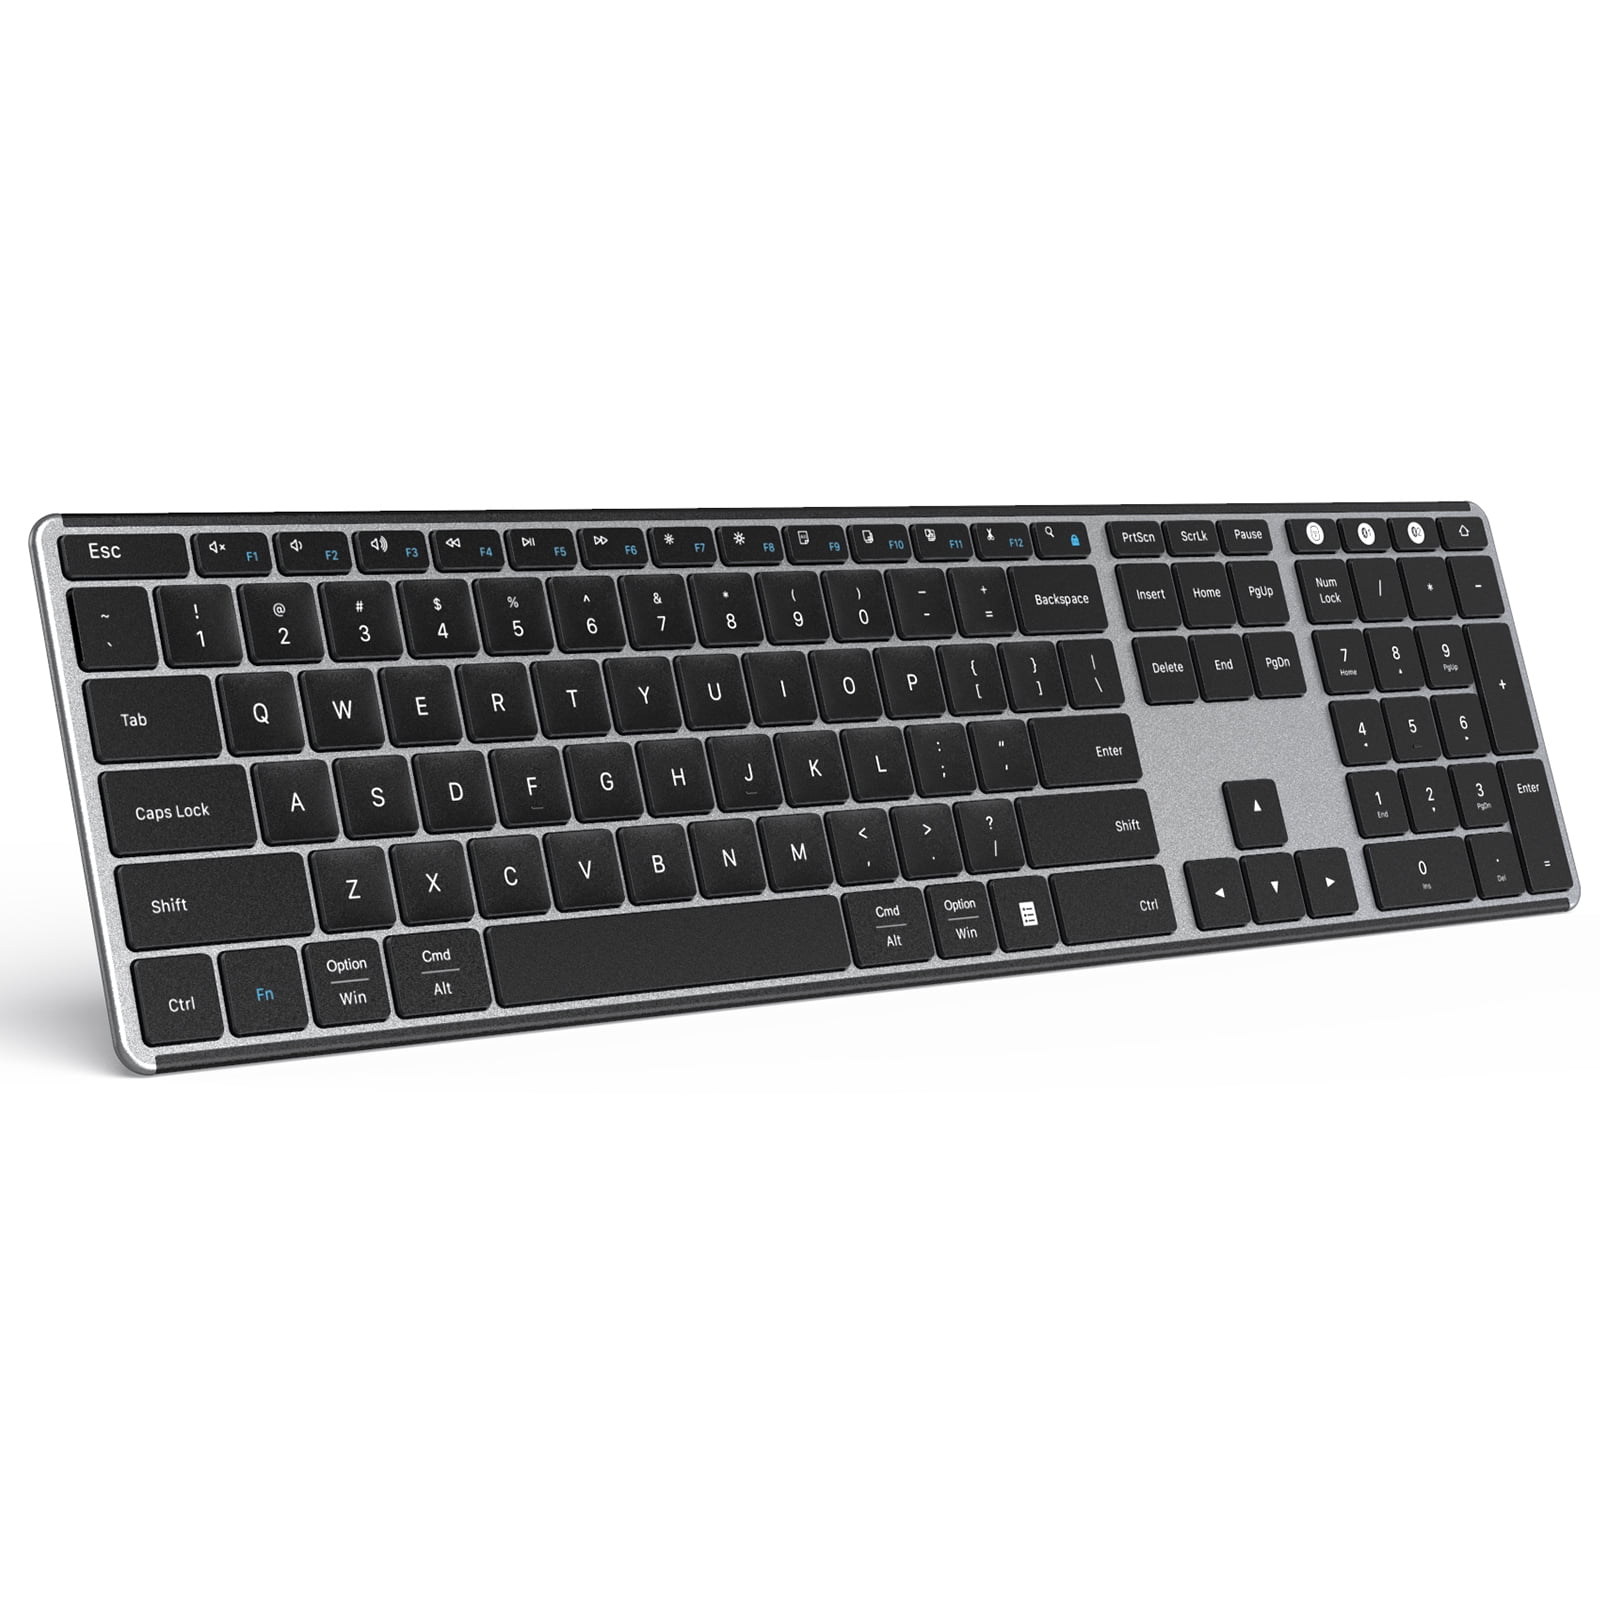 seenda Multi-Device Bluetooth Backlit Keyboard for Tablet Phone Computer Wireless Illuminated Rechargeable Keyboard with Number Pad Connect Up to 4 Devices Compatible Mac Android iOS Windows 